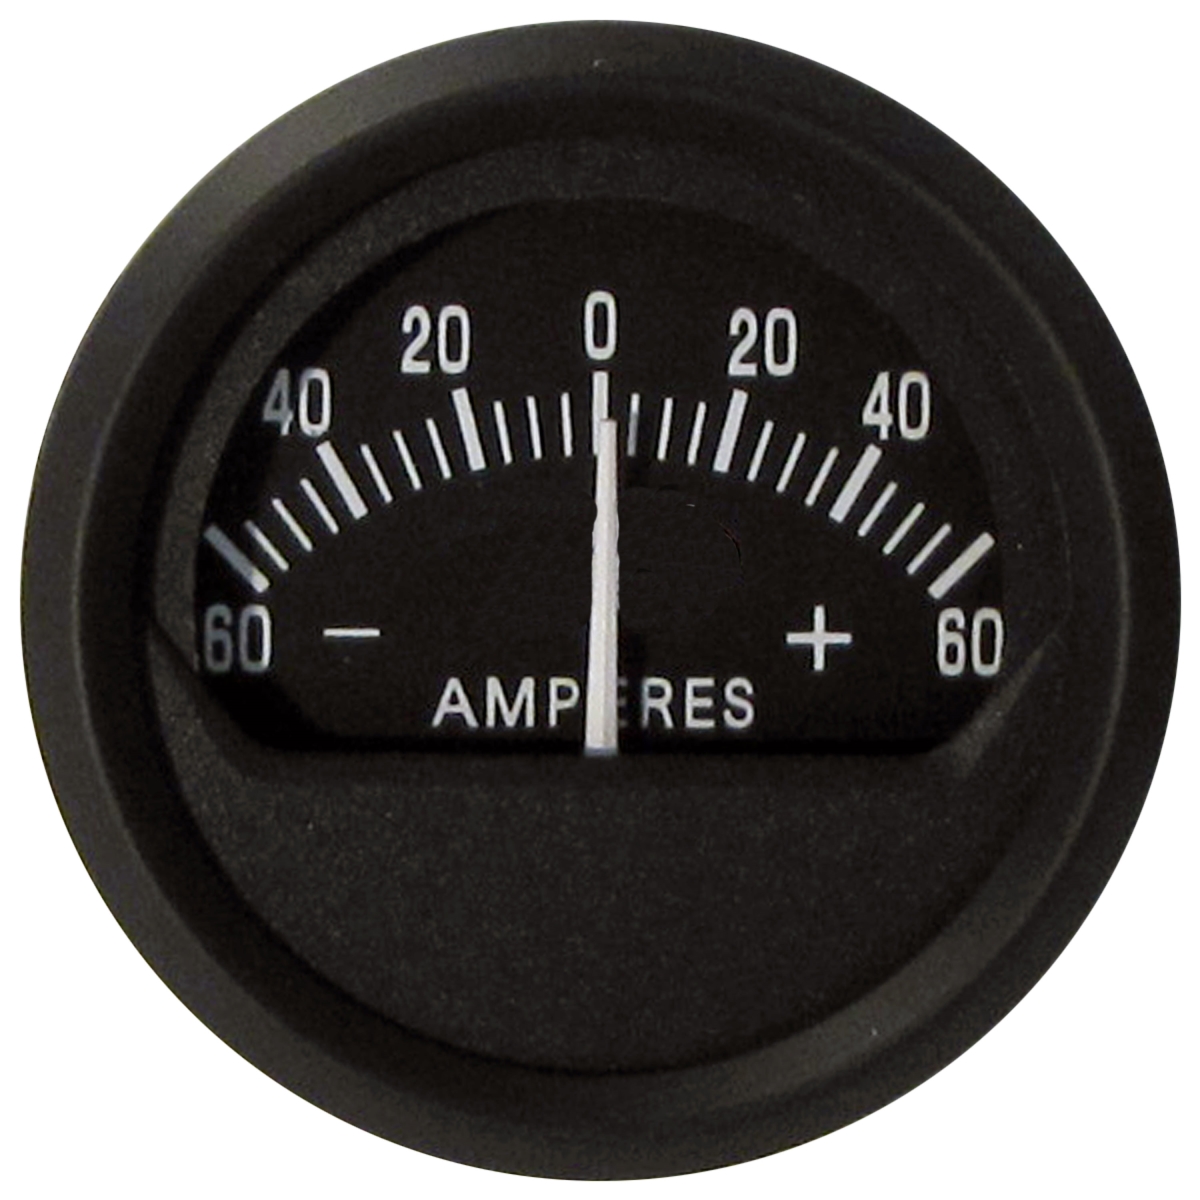 Picture of Faria 3003.3899 12822 Euro Ammeter Gauge - 2 in.